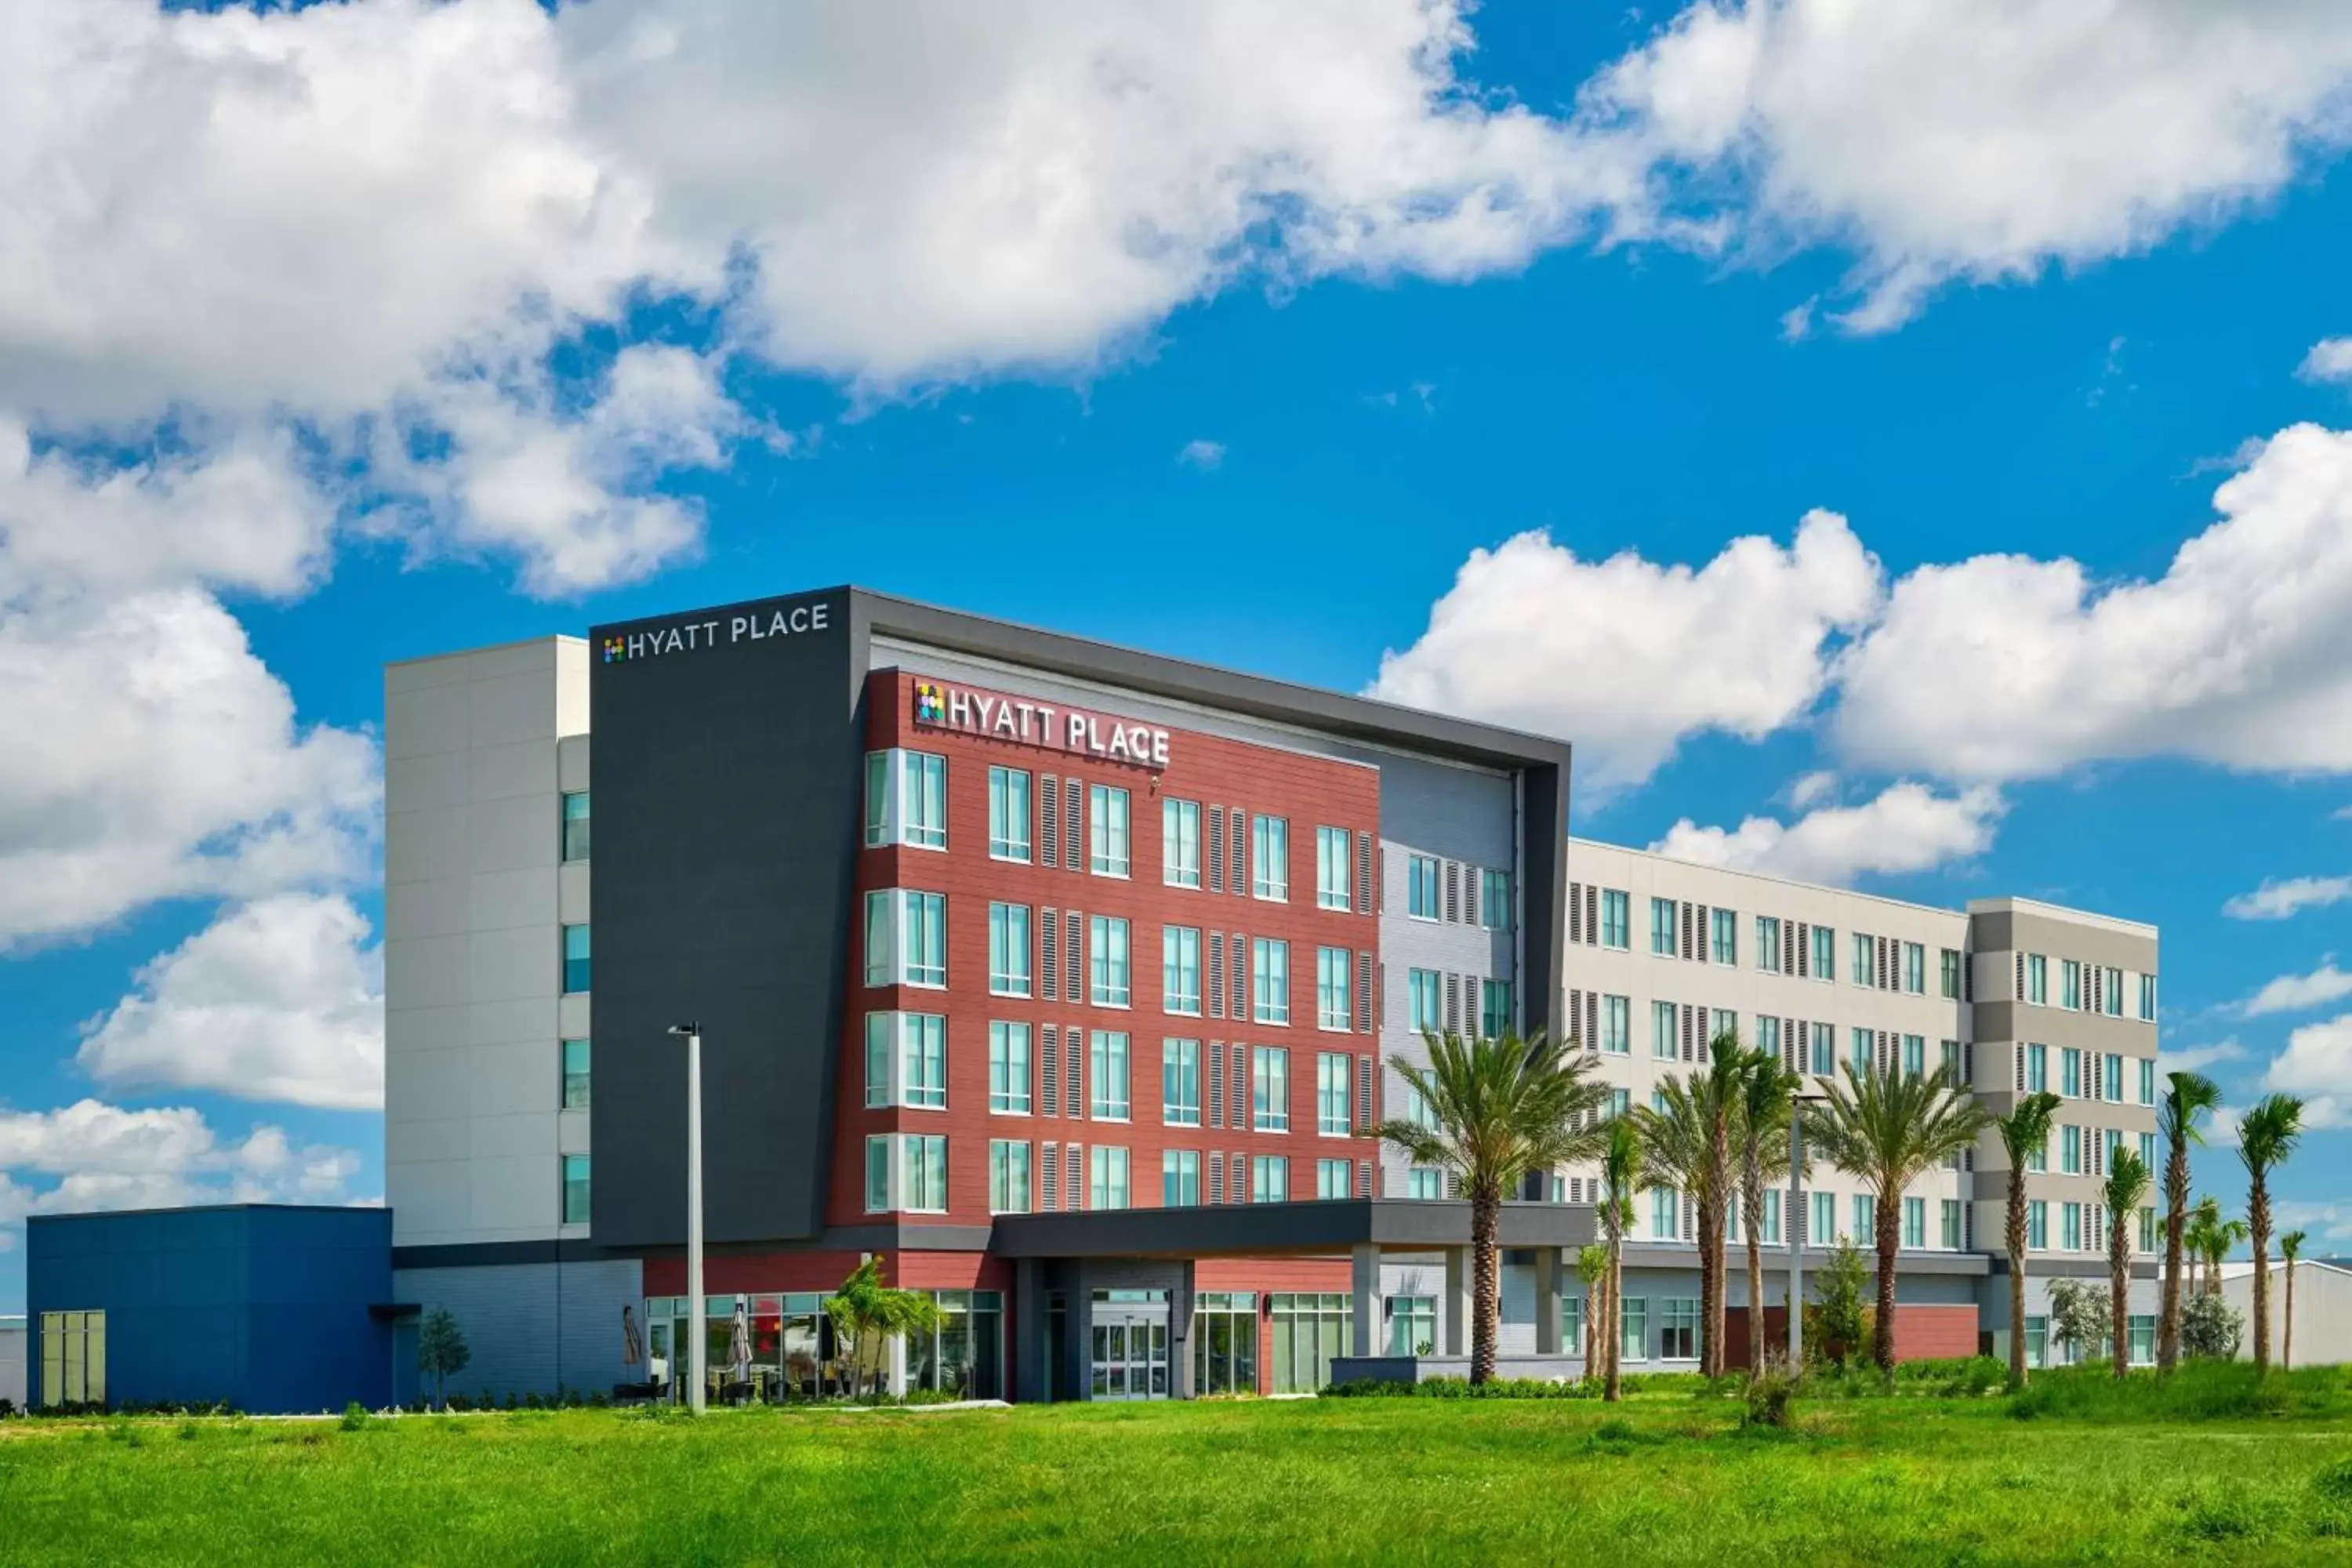 Property Building in Hyatt Place Melbourne Airport, Fl